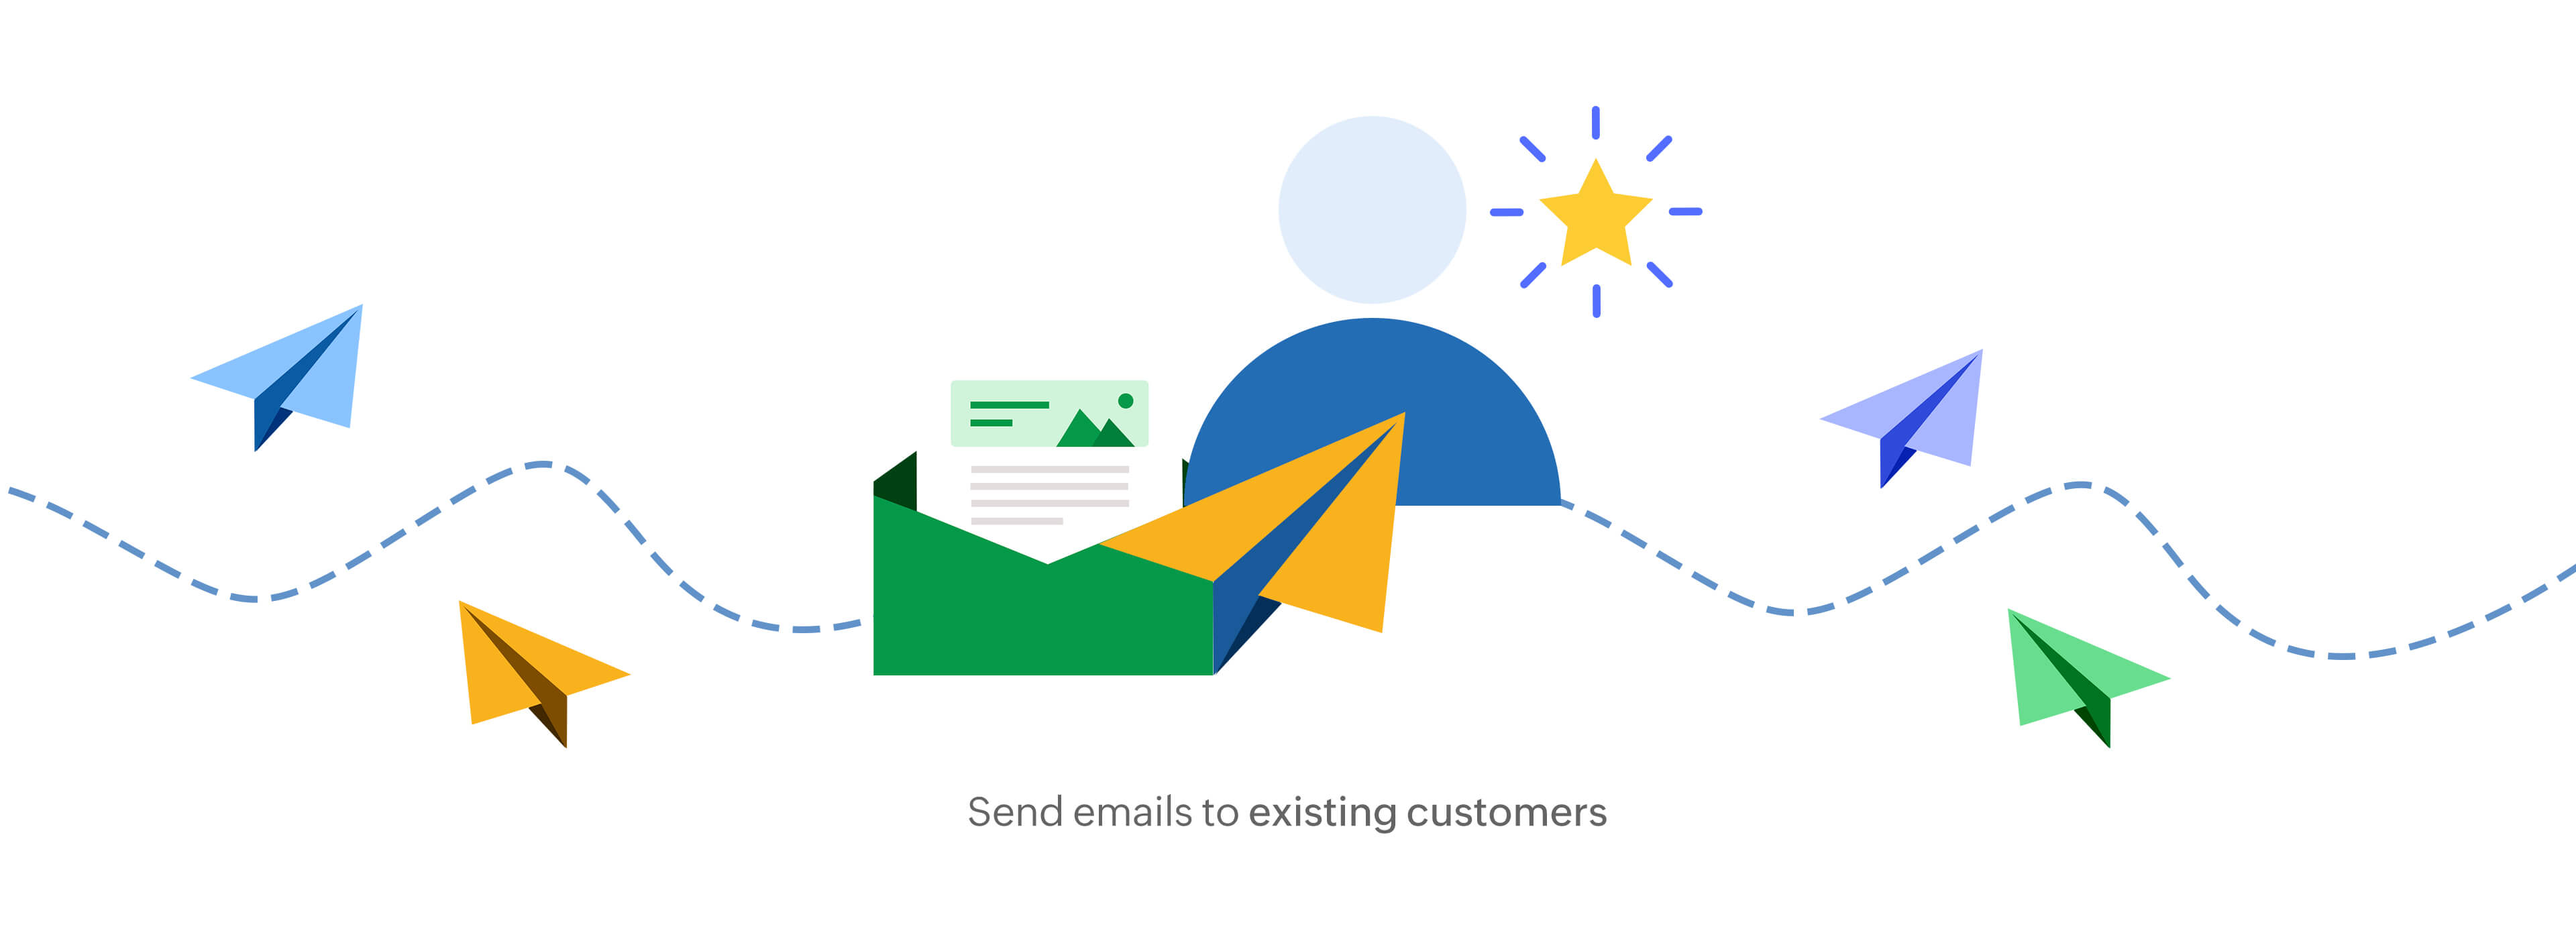 Send emails to existing customers